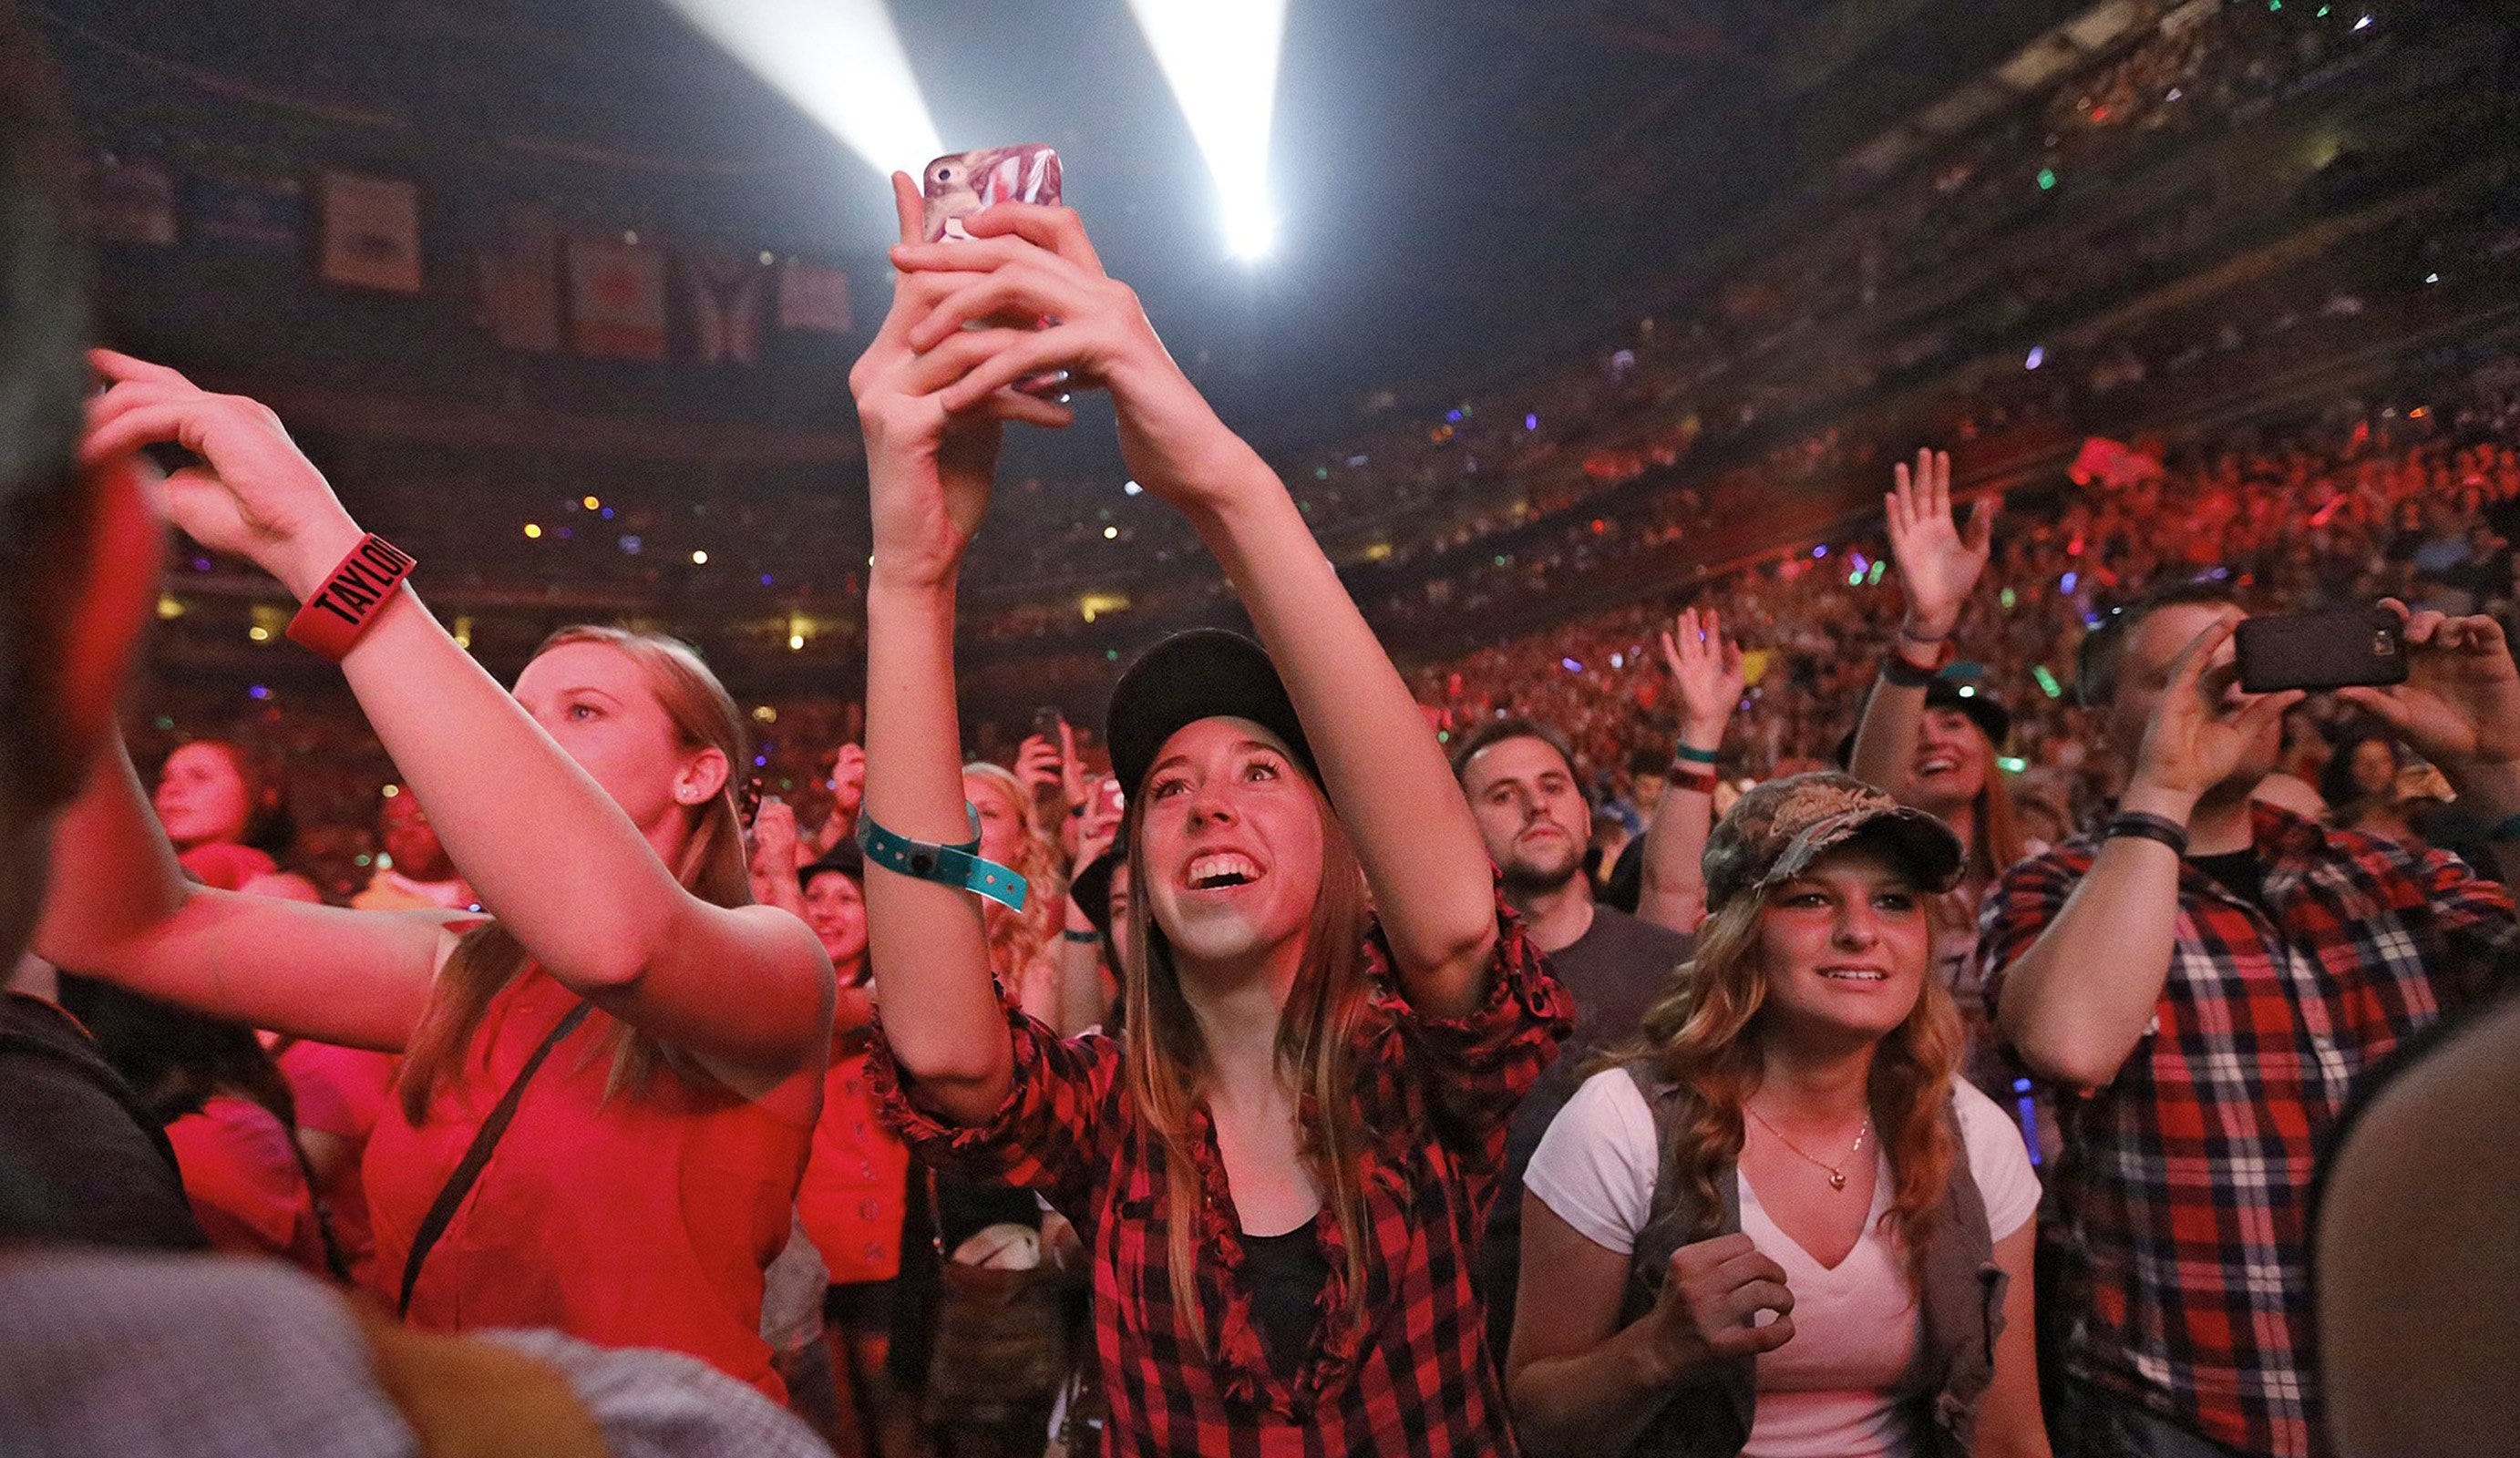 Fans react as Taylor Swift performs at Nationwide Arena during her Red Tour on Wednesday, May 8, 2013. (Columbus Dispatch photo by Jonathan Quilter)